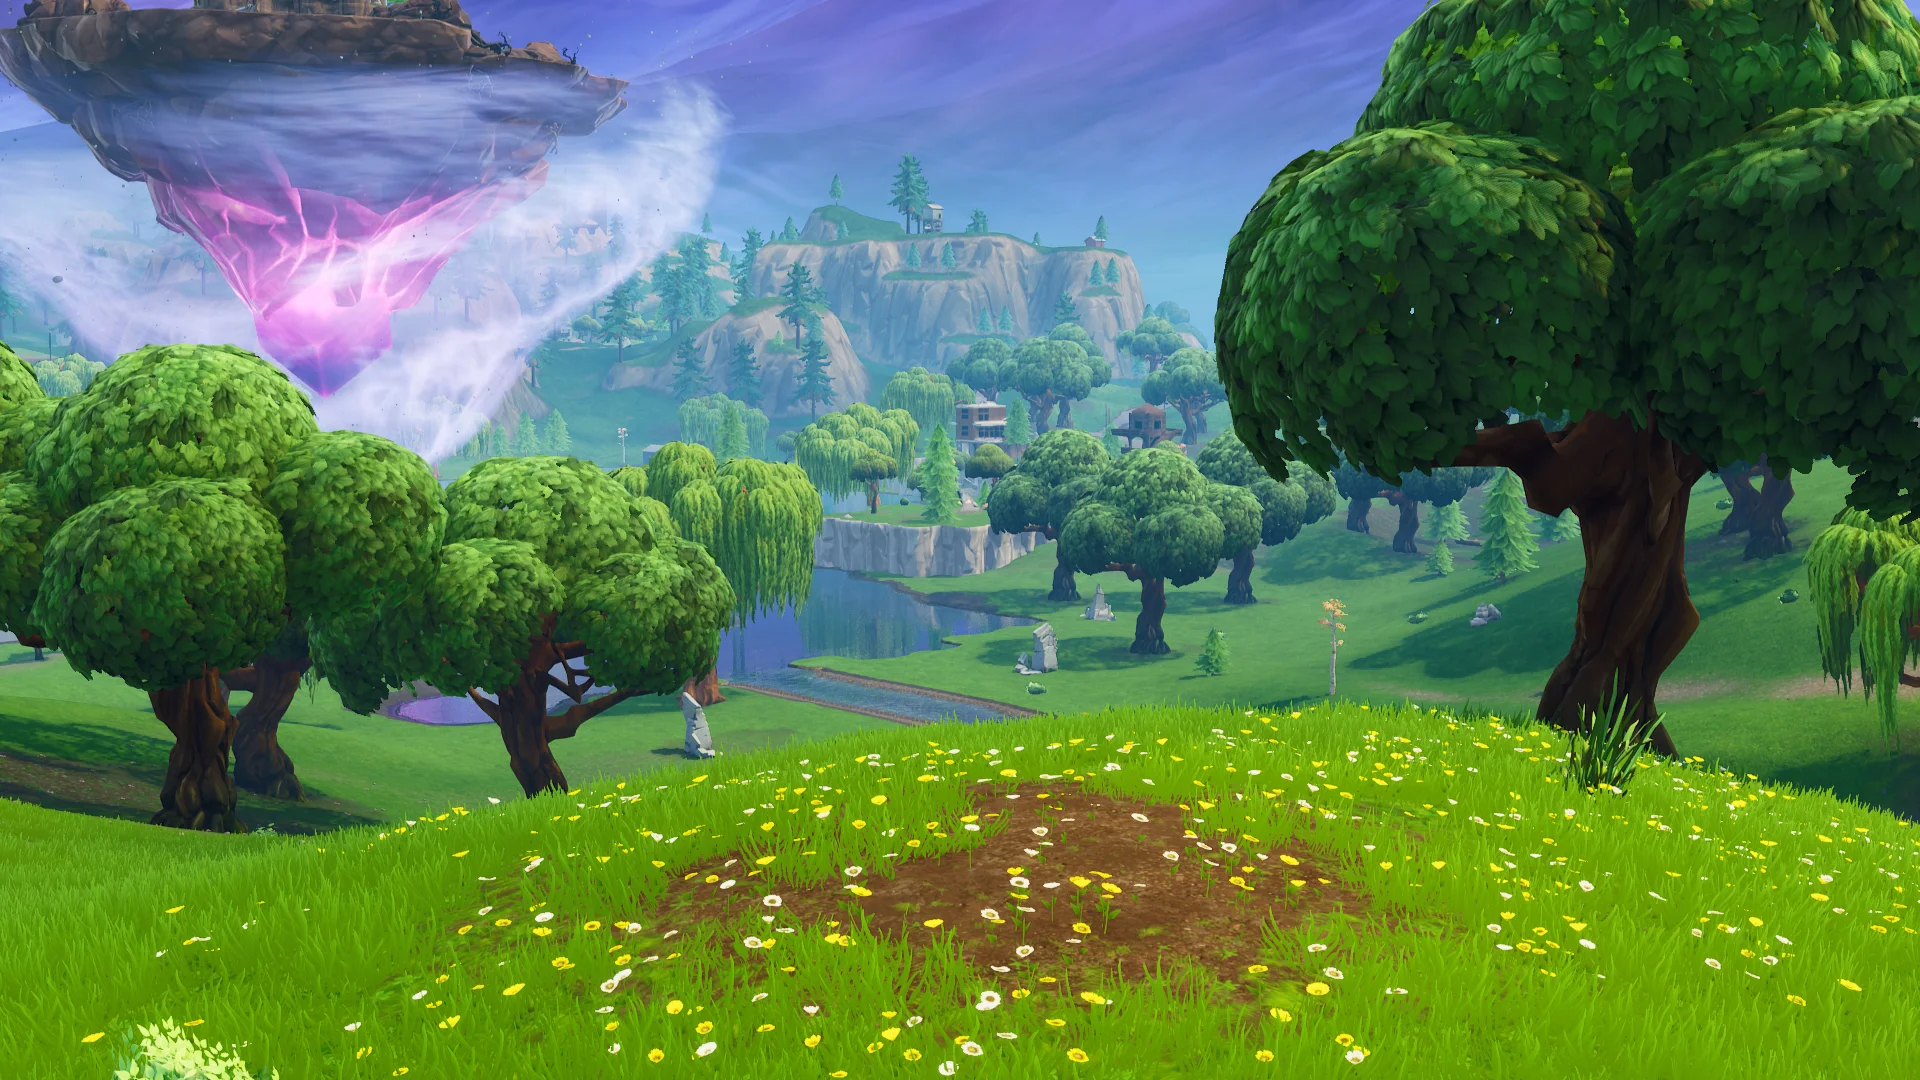 Is the Fortnite Chapter 2 Map Returning Soon According to a Leak?